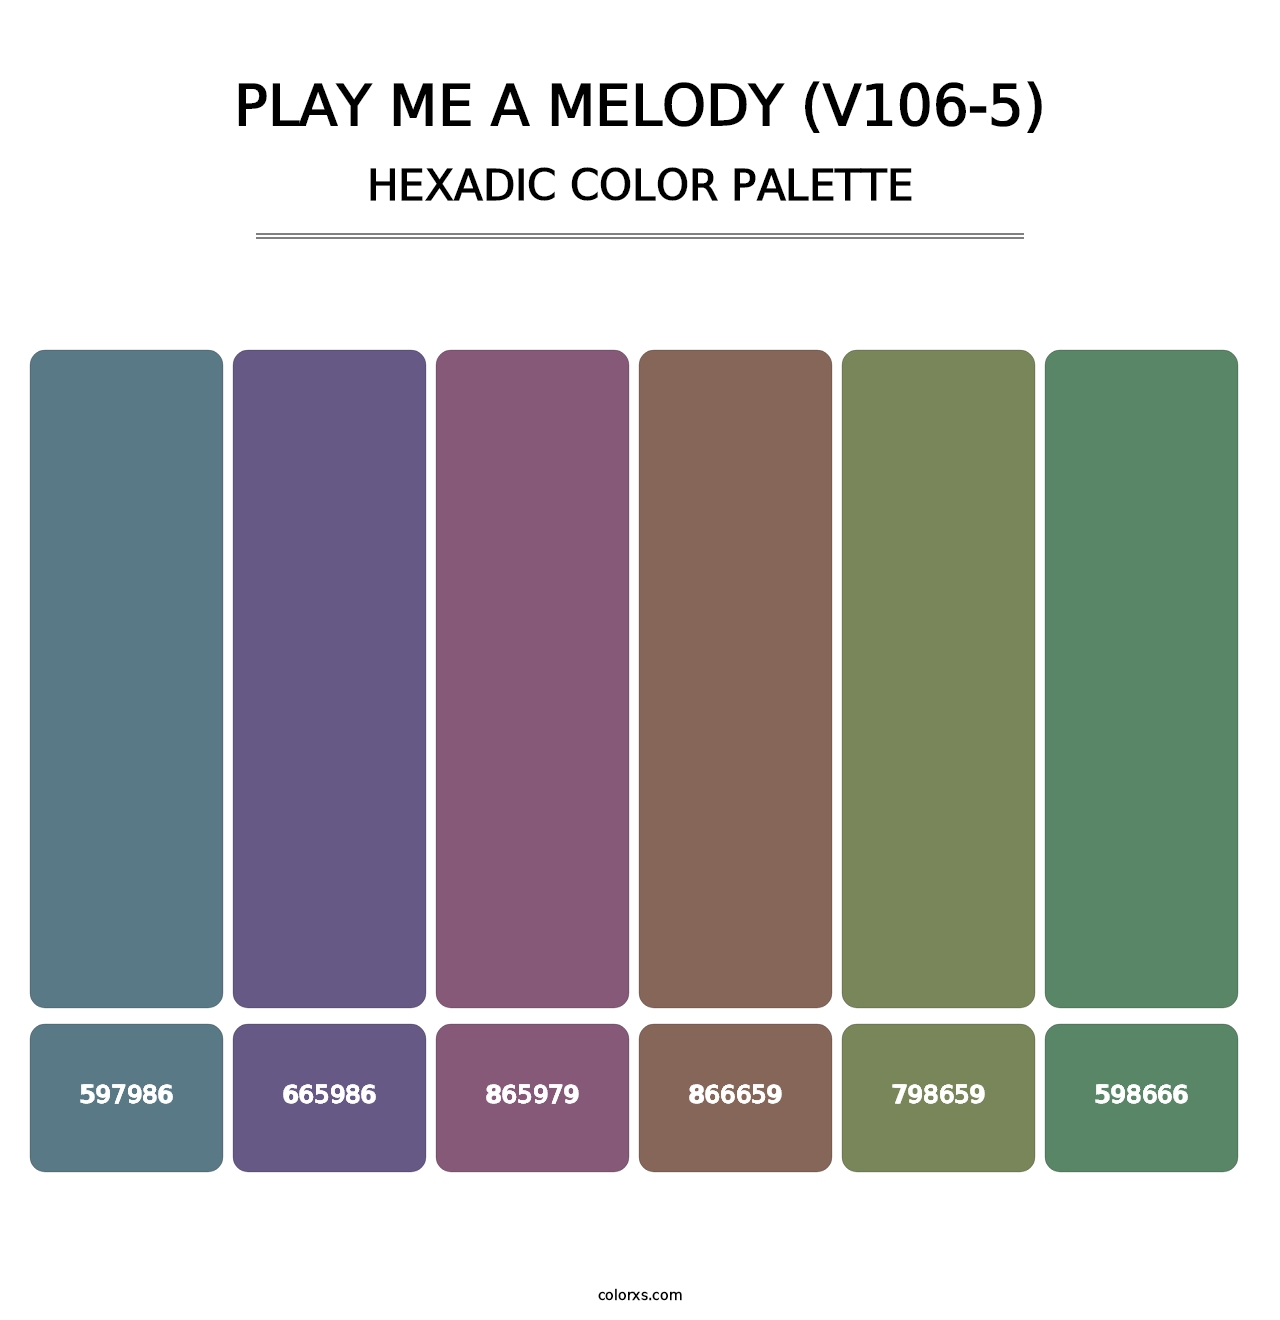 Play Me a Melody (V106-5) - Hexadic Color Palette